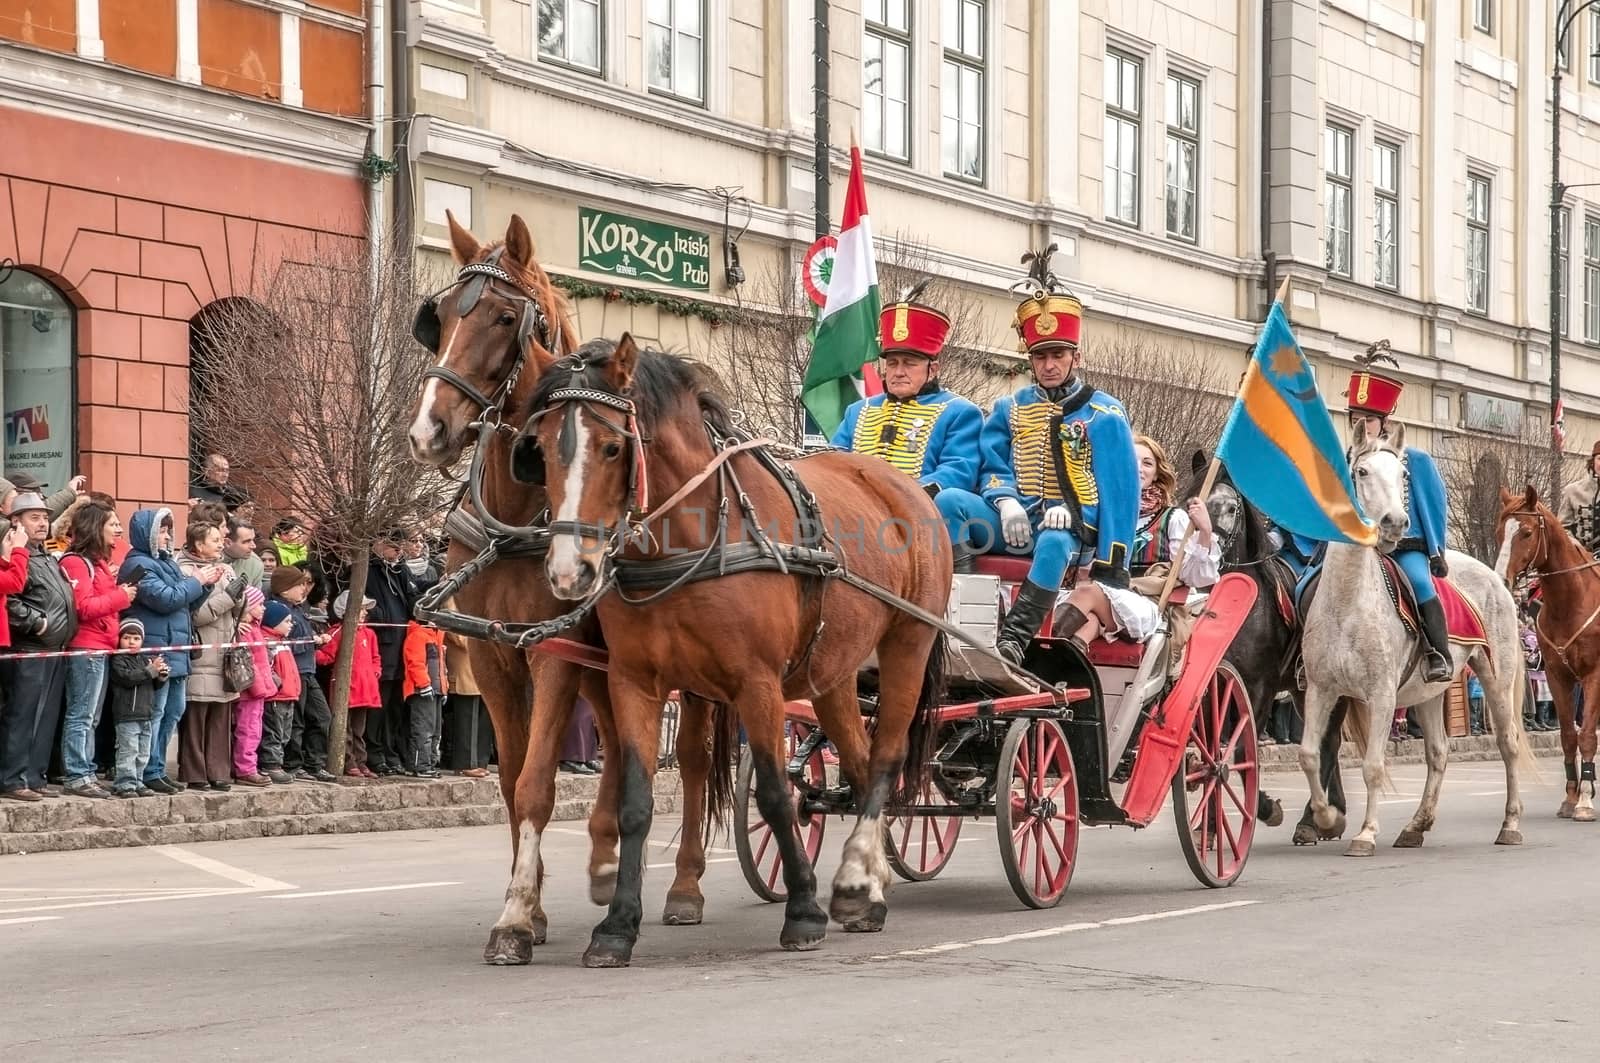 Hungary 's Day , celebrated in the Saint George city , Romania!